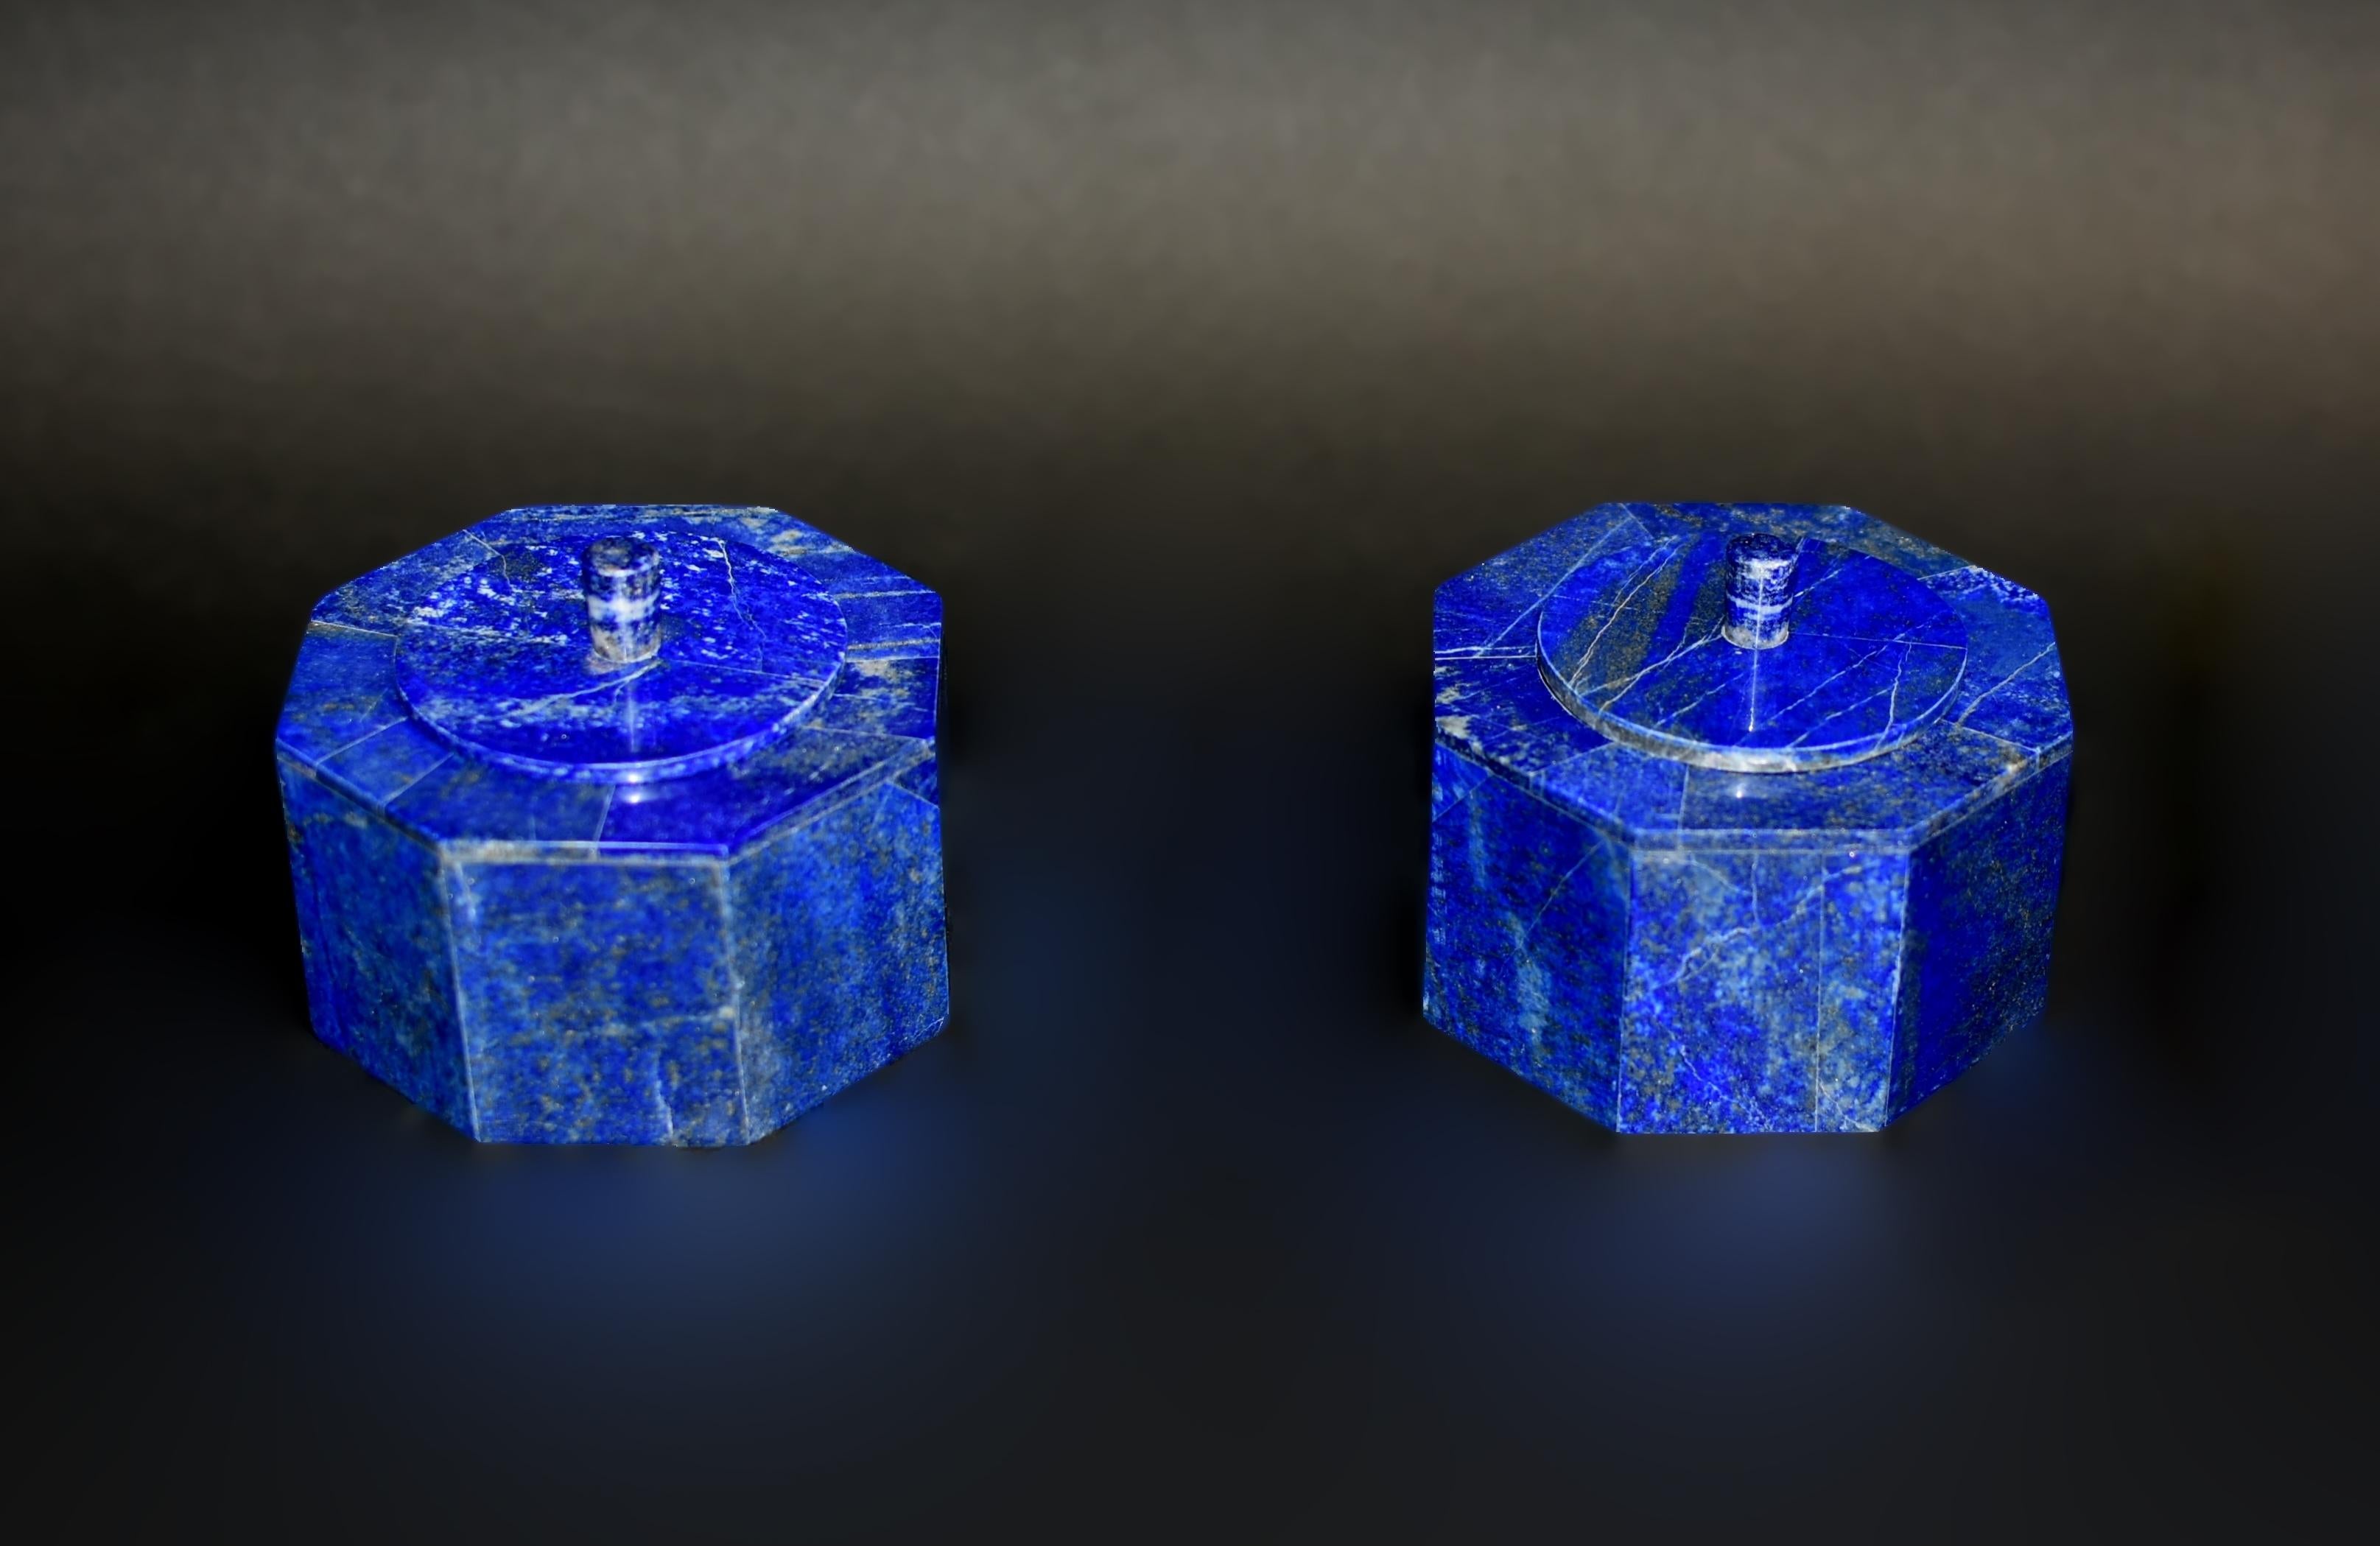 Beautiful 2.4 lb octagonal boxes made of the finest, grade AAA natural lapis lazuli.. Round lid with elegant finial and fine carrara marble interior. High percentage of Lazurite mineral gives the boxes the stunning, saturated blue color. Beautiful